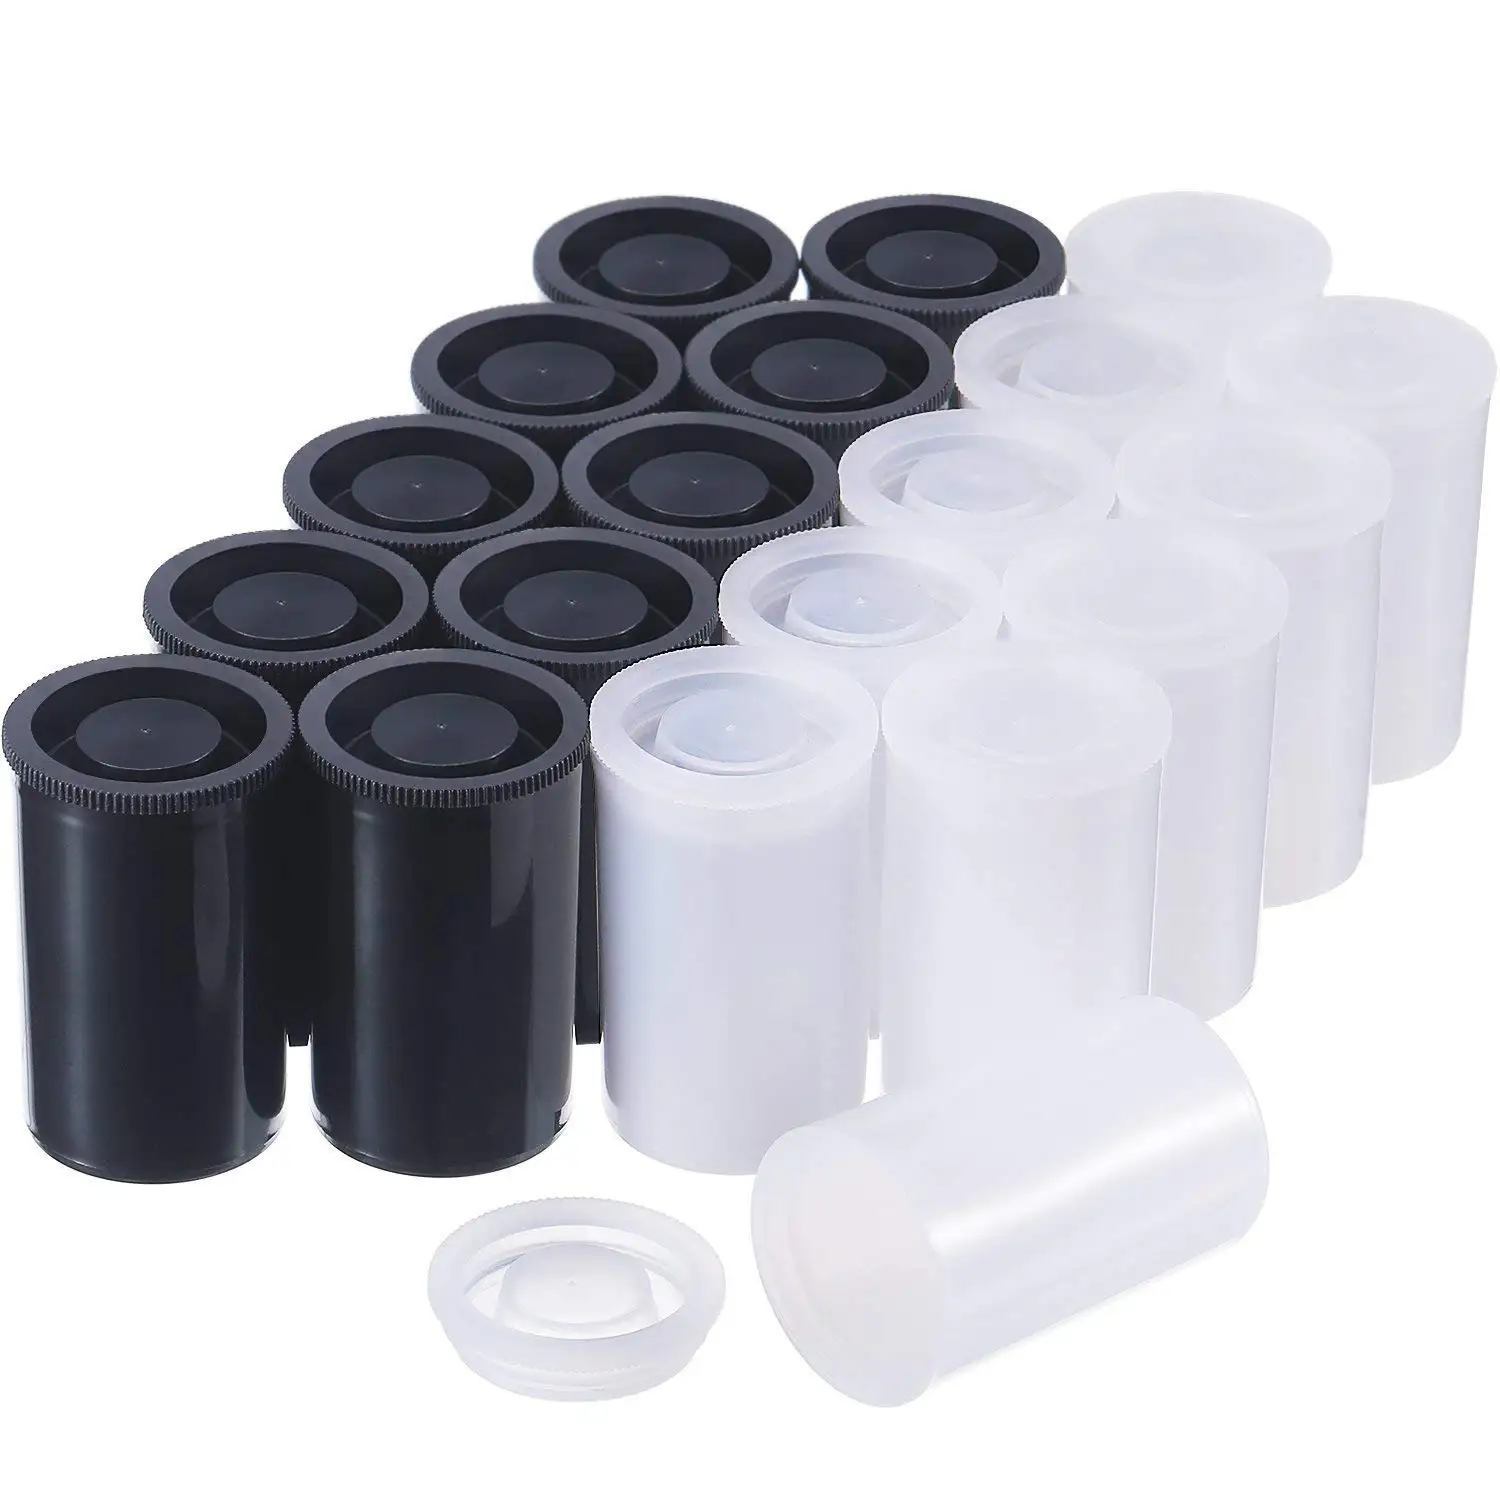 AKIRO Film Canisters with Caps 35 mm Empty Camera Reel Storage Containers Case Plastic Storage 15 Pack Black 